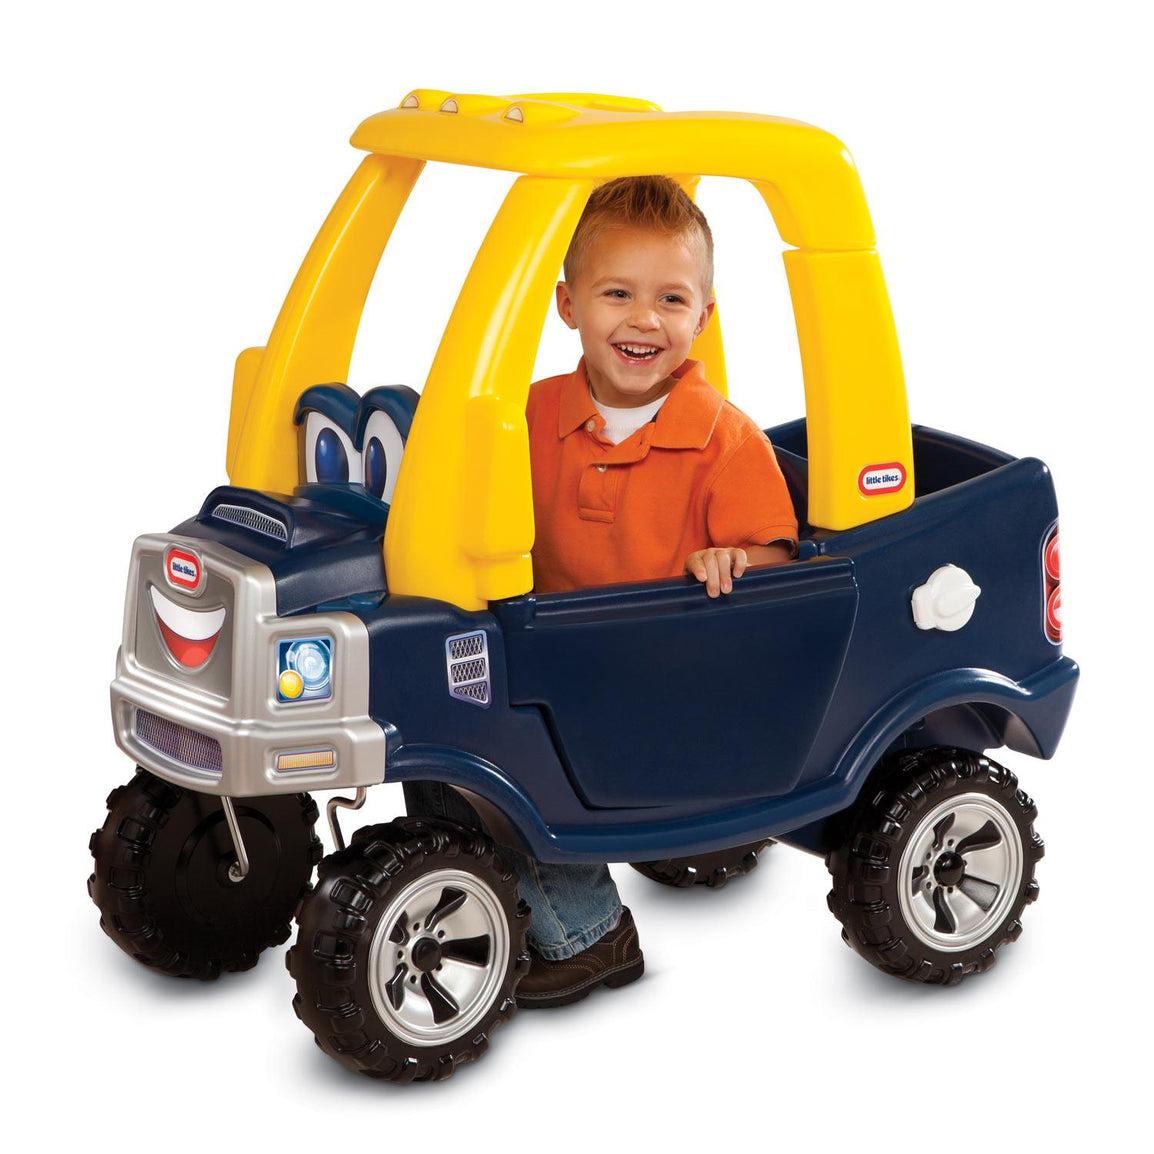 Roomy pickup truck is perfect for kids!